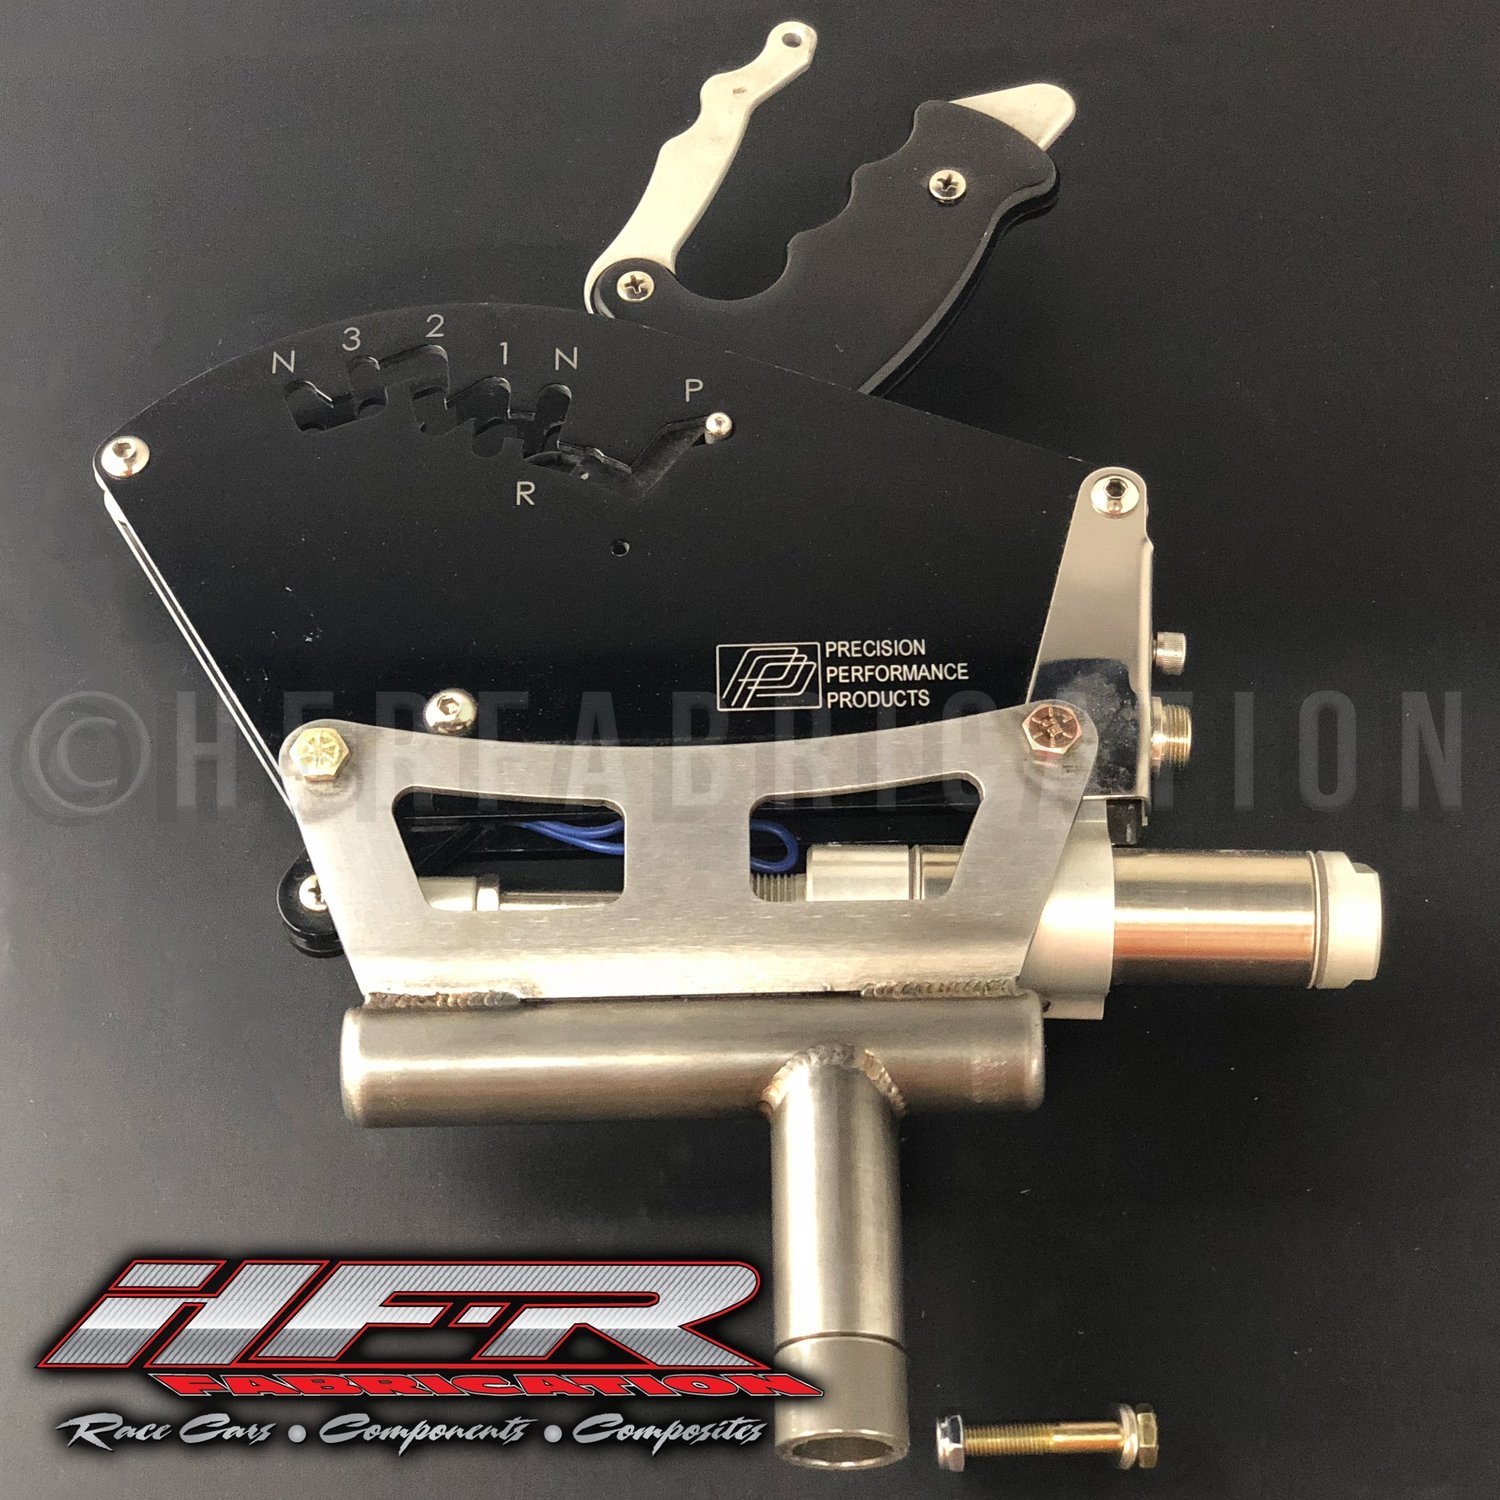 Precision Products Race Car Shifter Mount by HFR